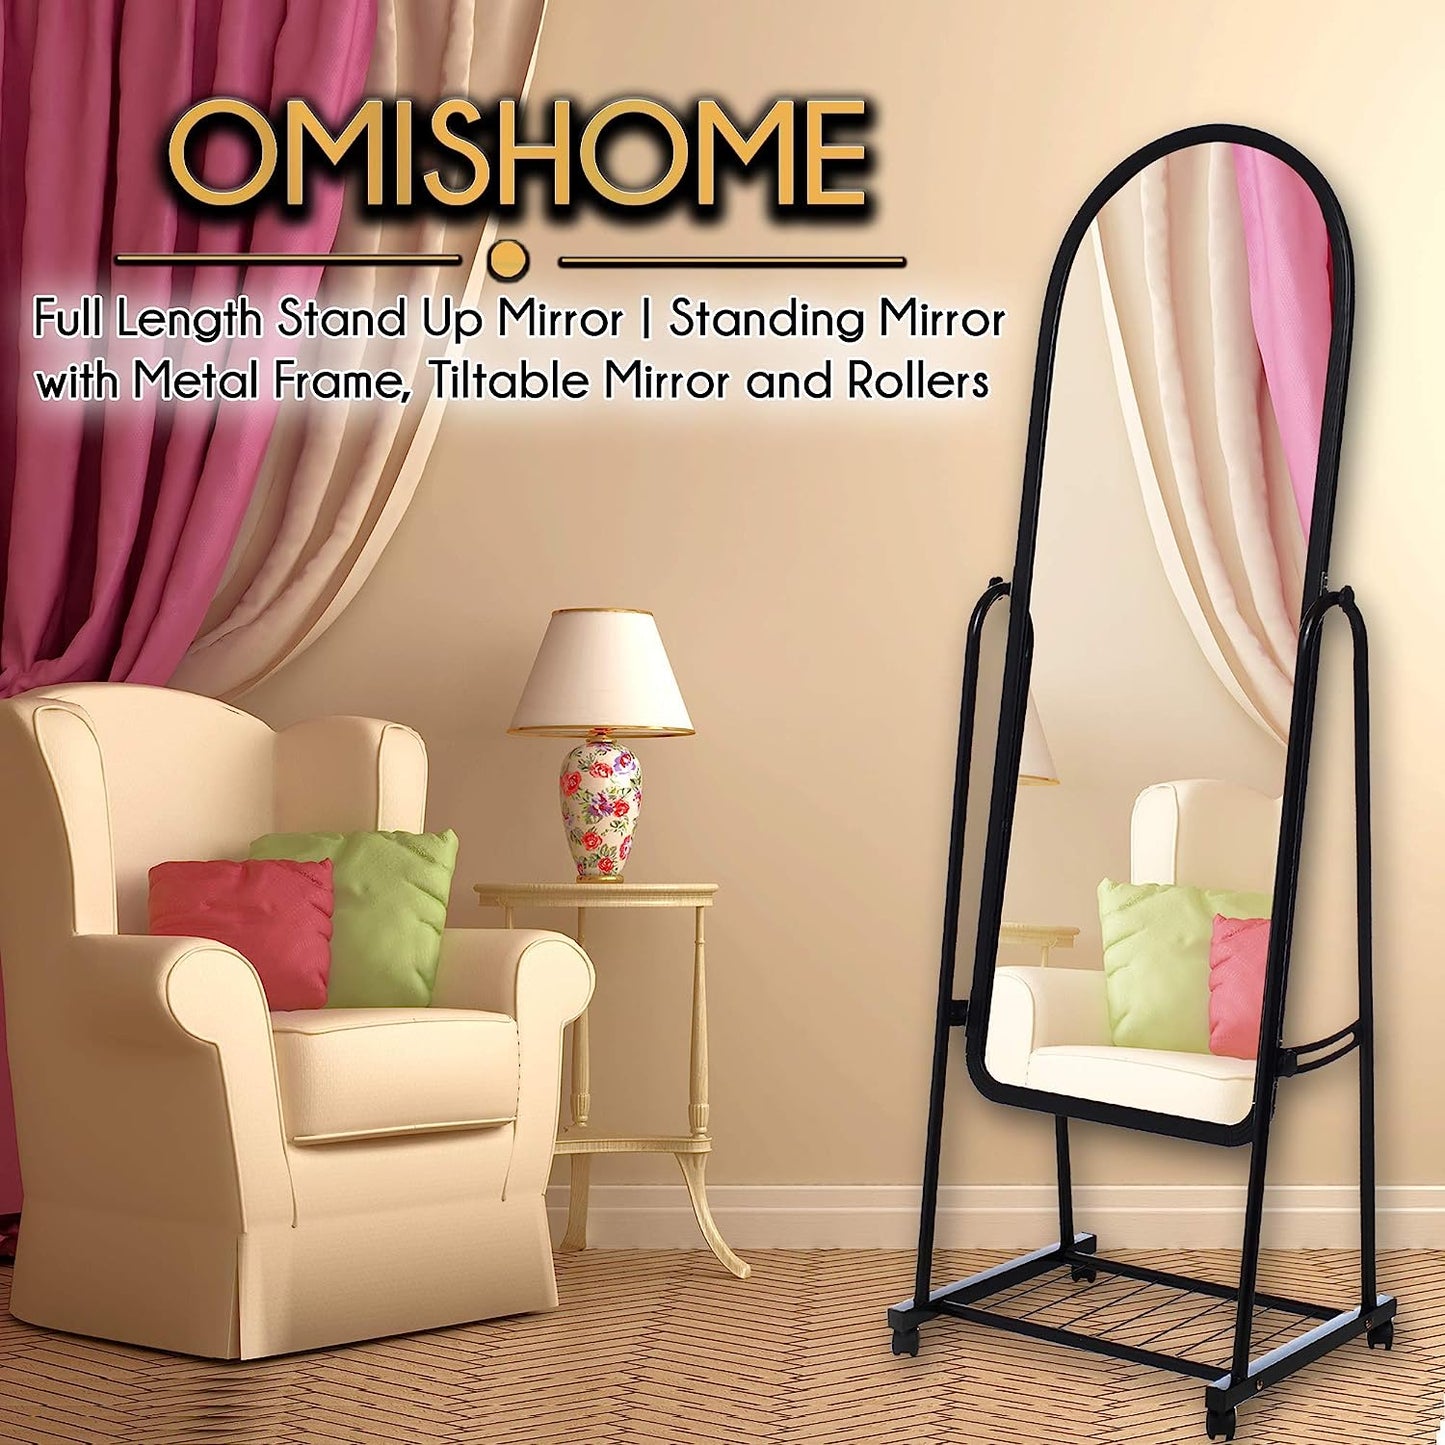 US Based Company) Black Full Length Rolling Mirror | A Stng Yet Simple Design | Handy with Added Storage | Easy to Move and Adjust | Can Be Assembled in Minutes | Sure to Delight You